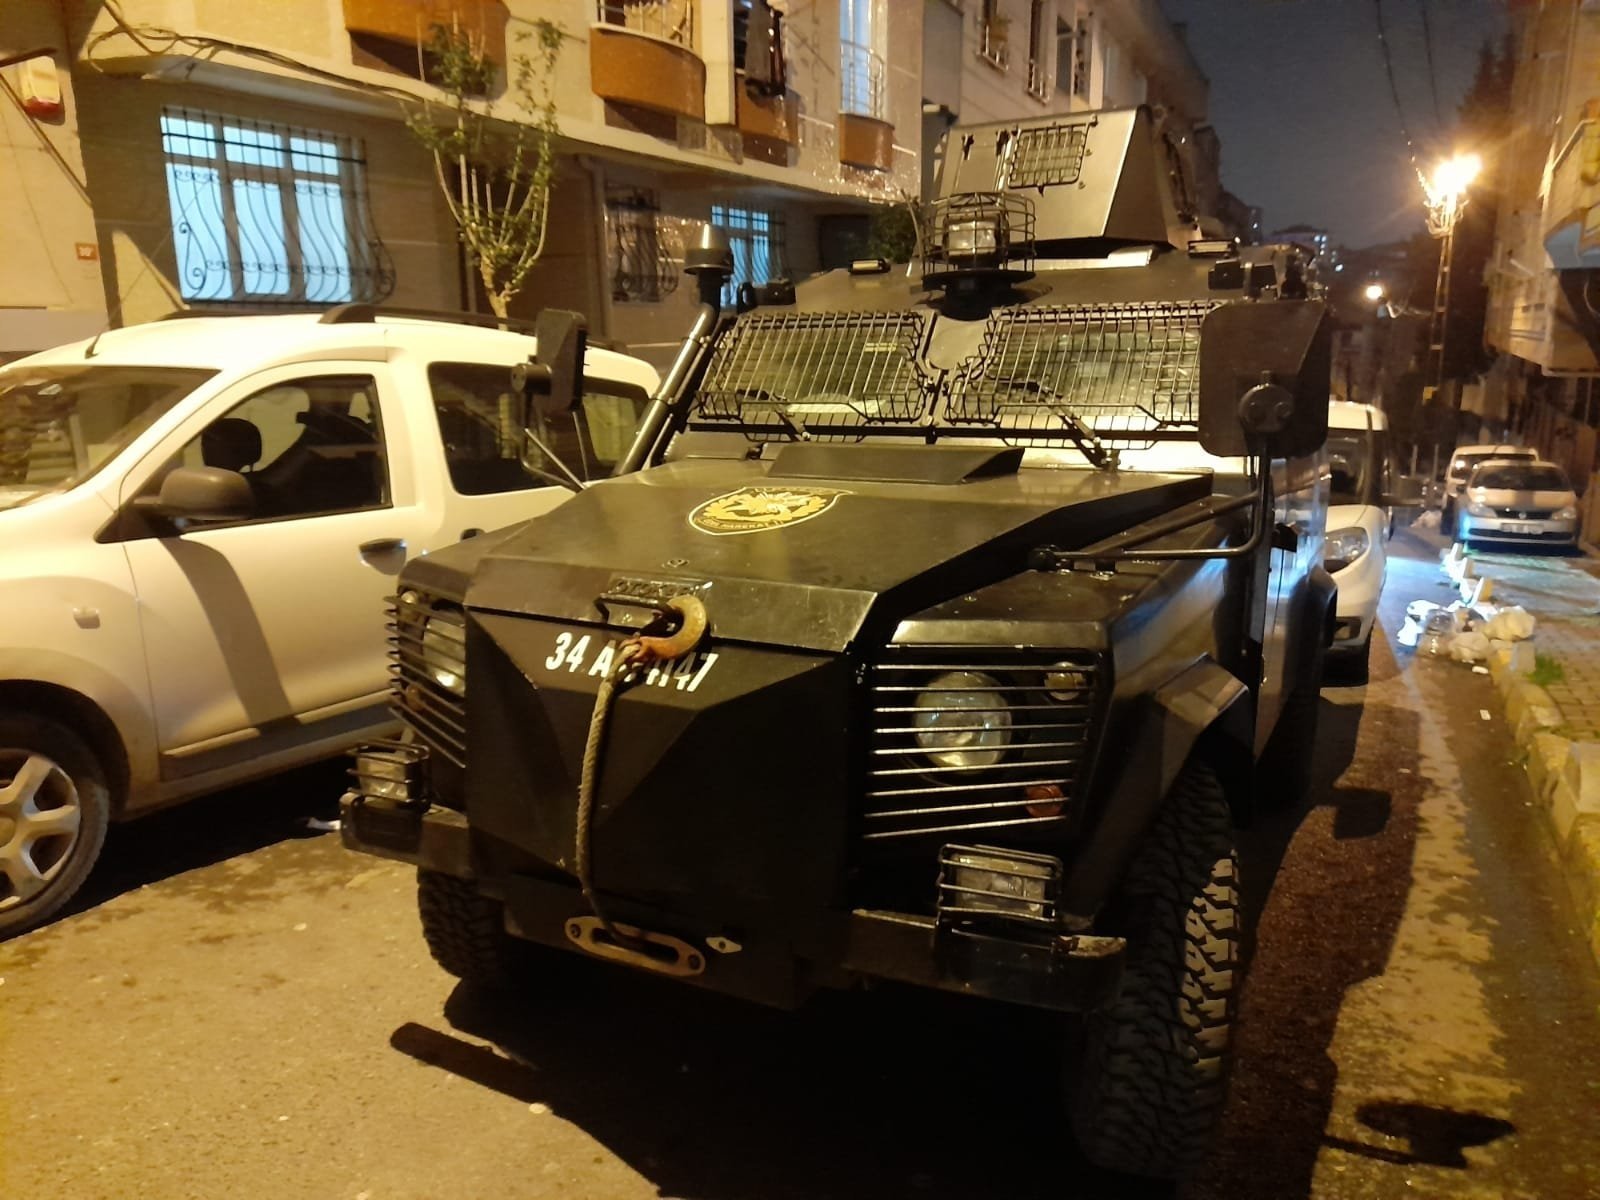 An armored police vehicle pictured in front of an apartment building in Istanbul's Bağcılar district, Istanbul, Turkey, April 7, 2021. (DHA Photo)